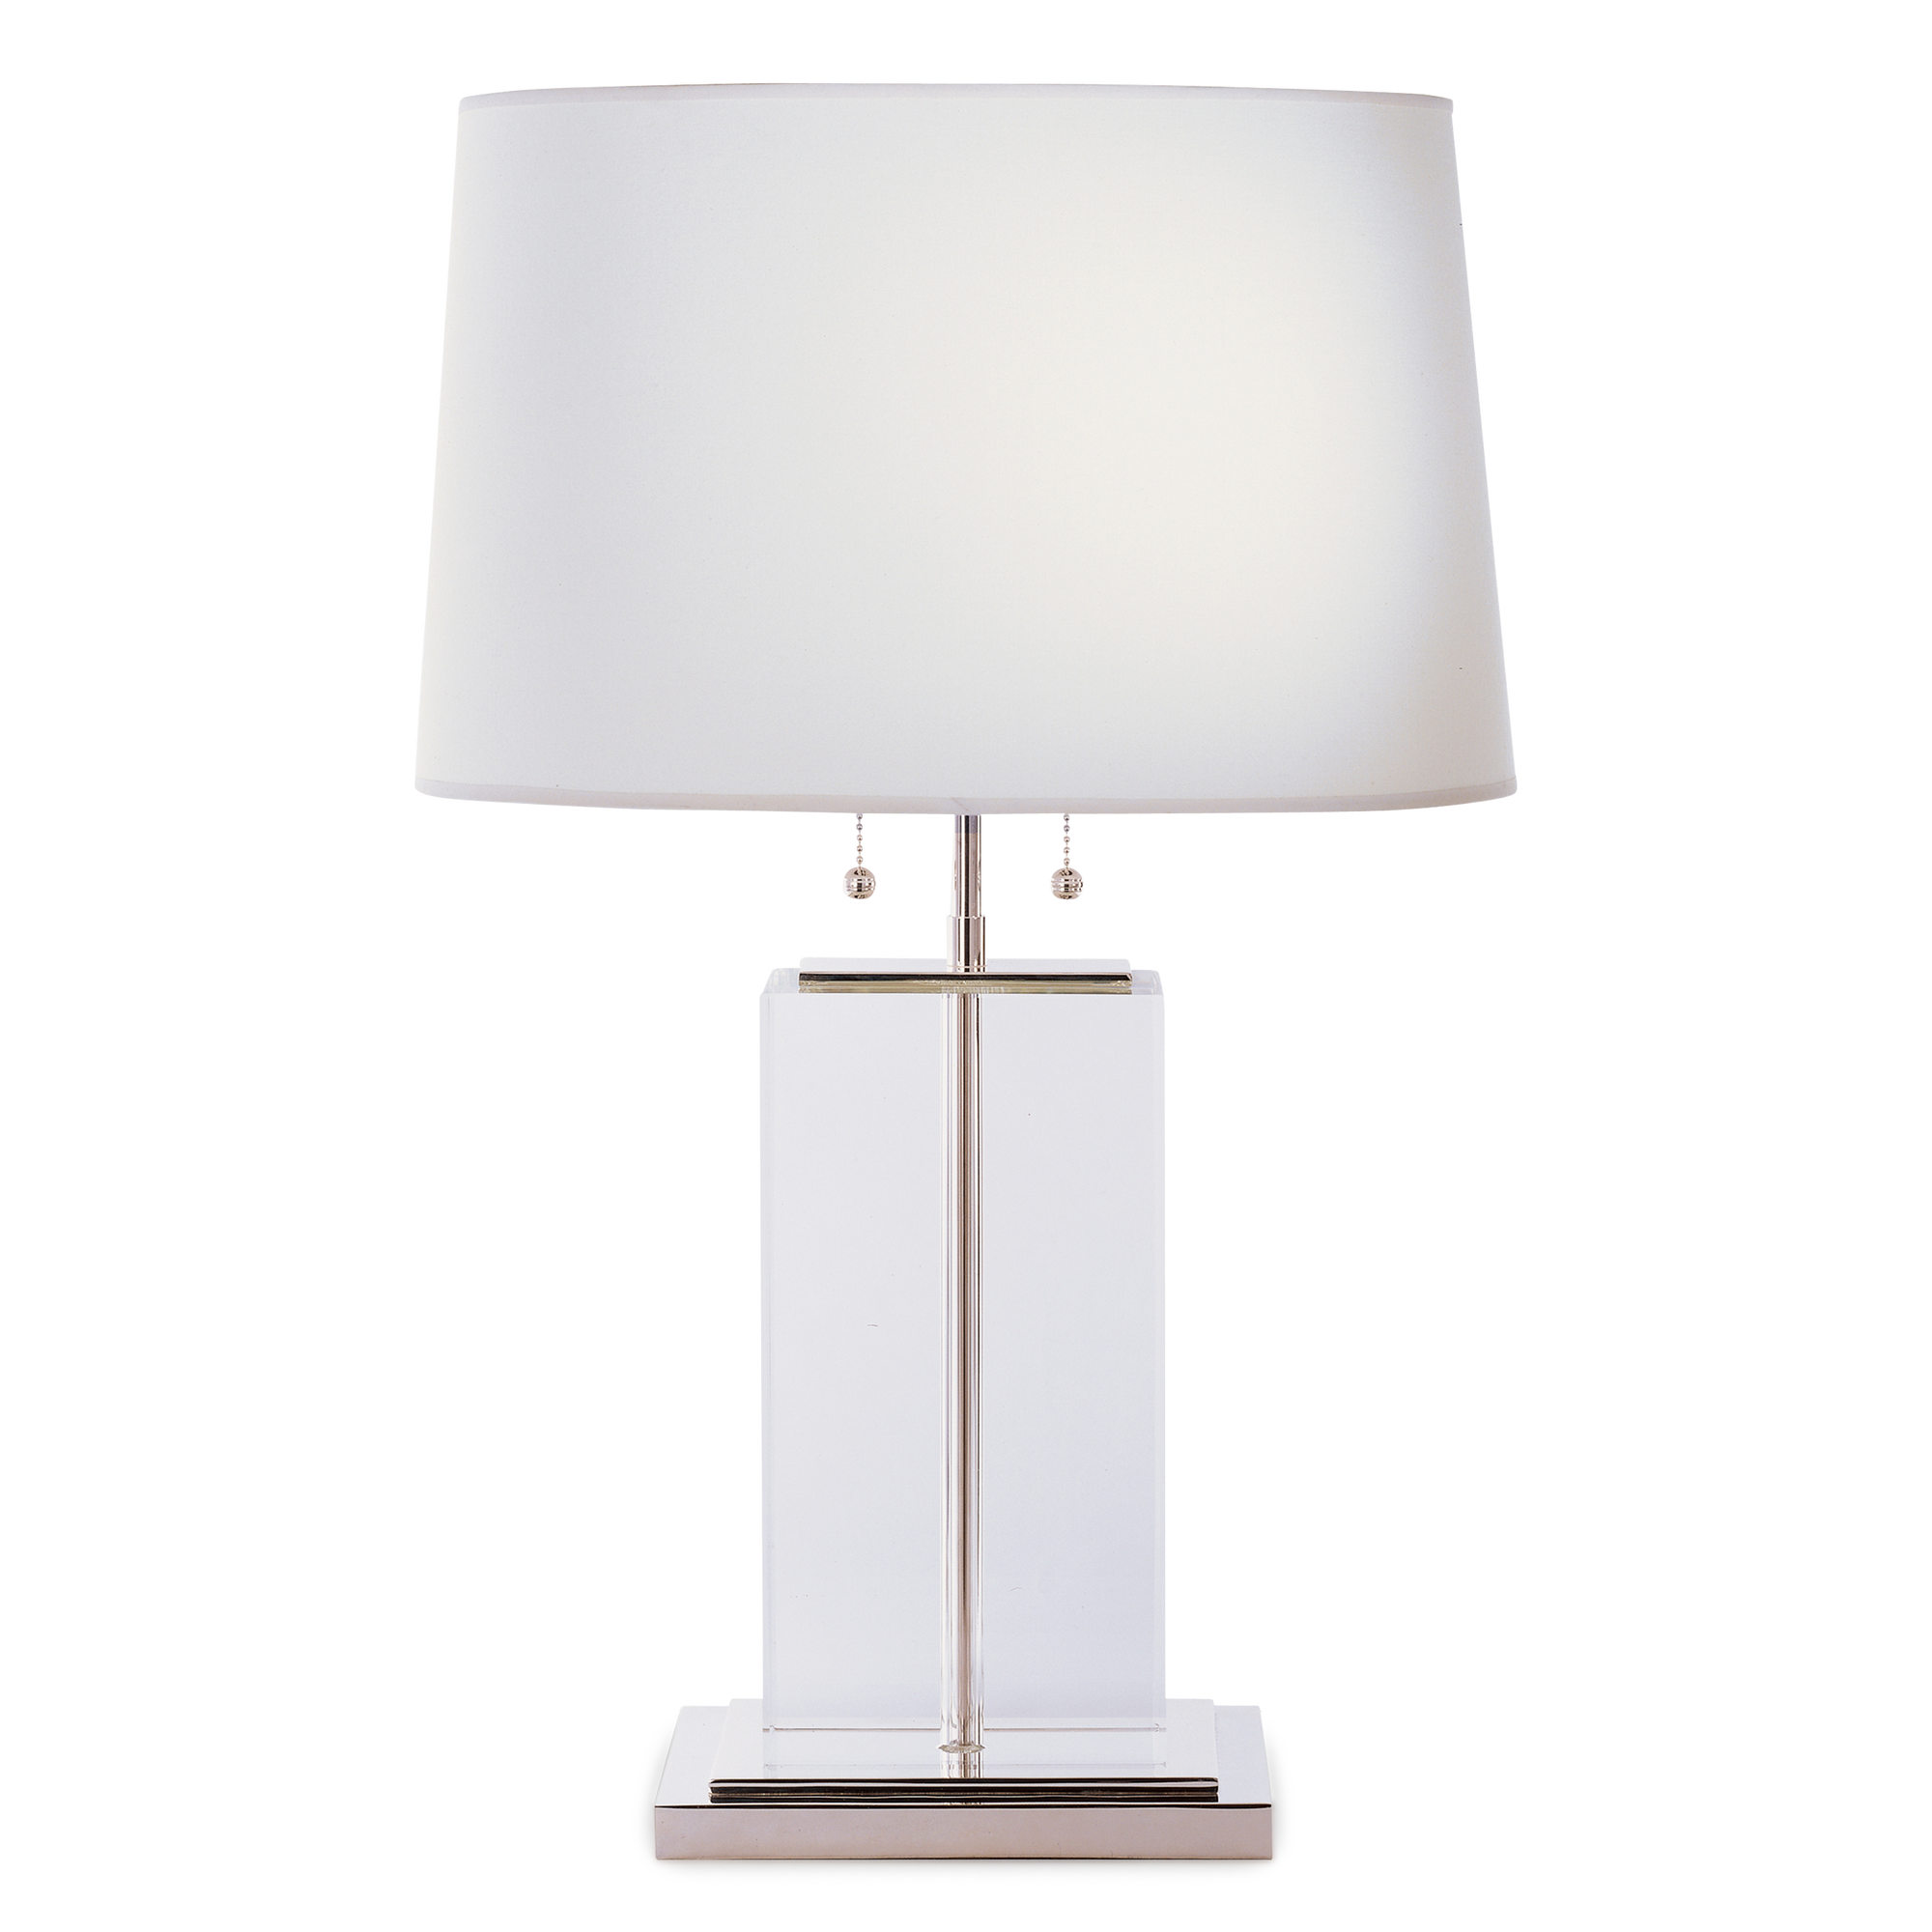 Crystal table lamp with polished silver accents and an oval cotton shade.